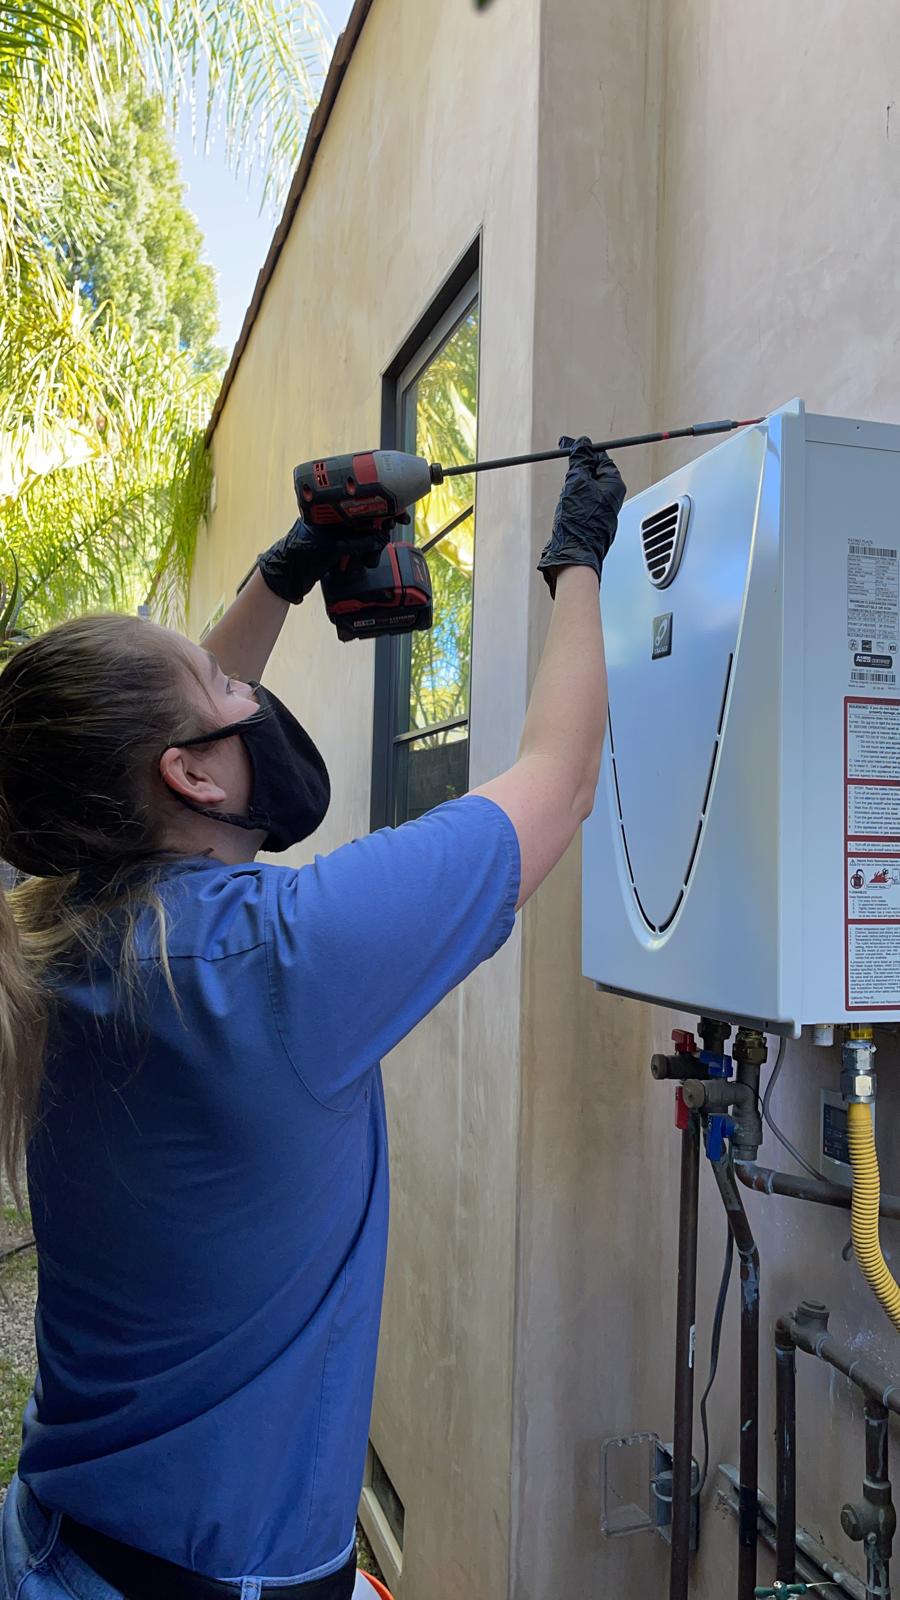 Monkey Wrench Plumbing technician servicing tankless water heater